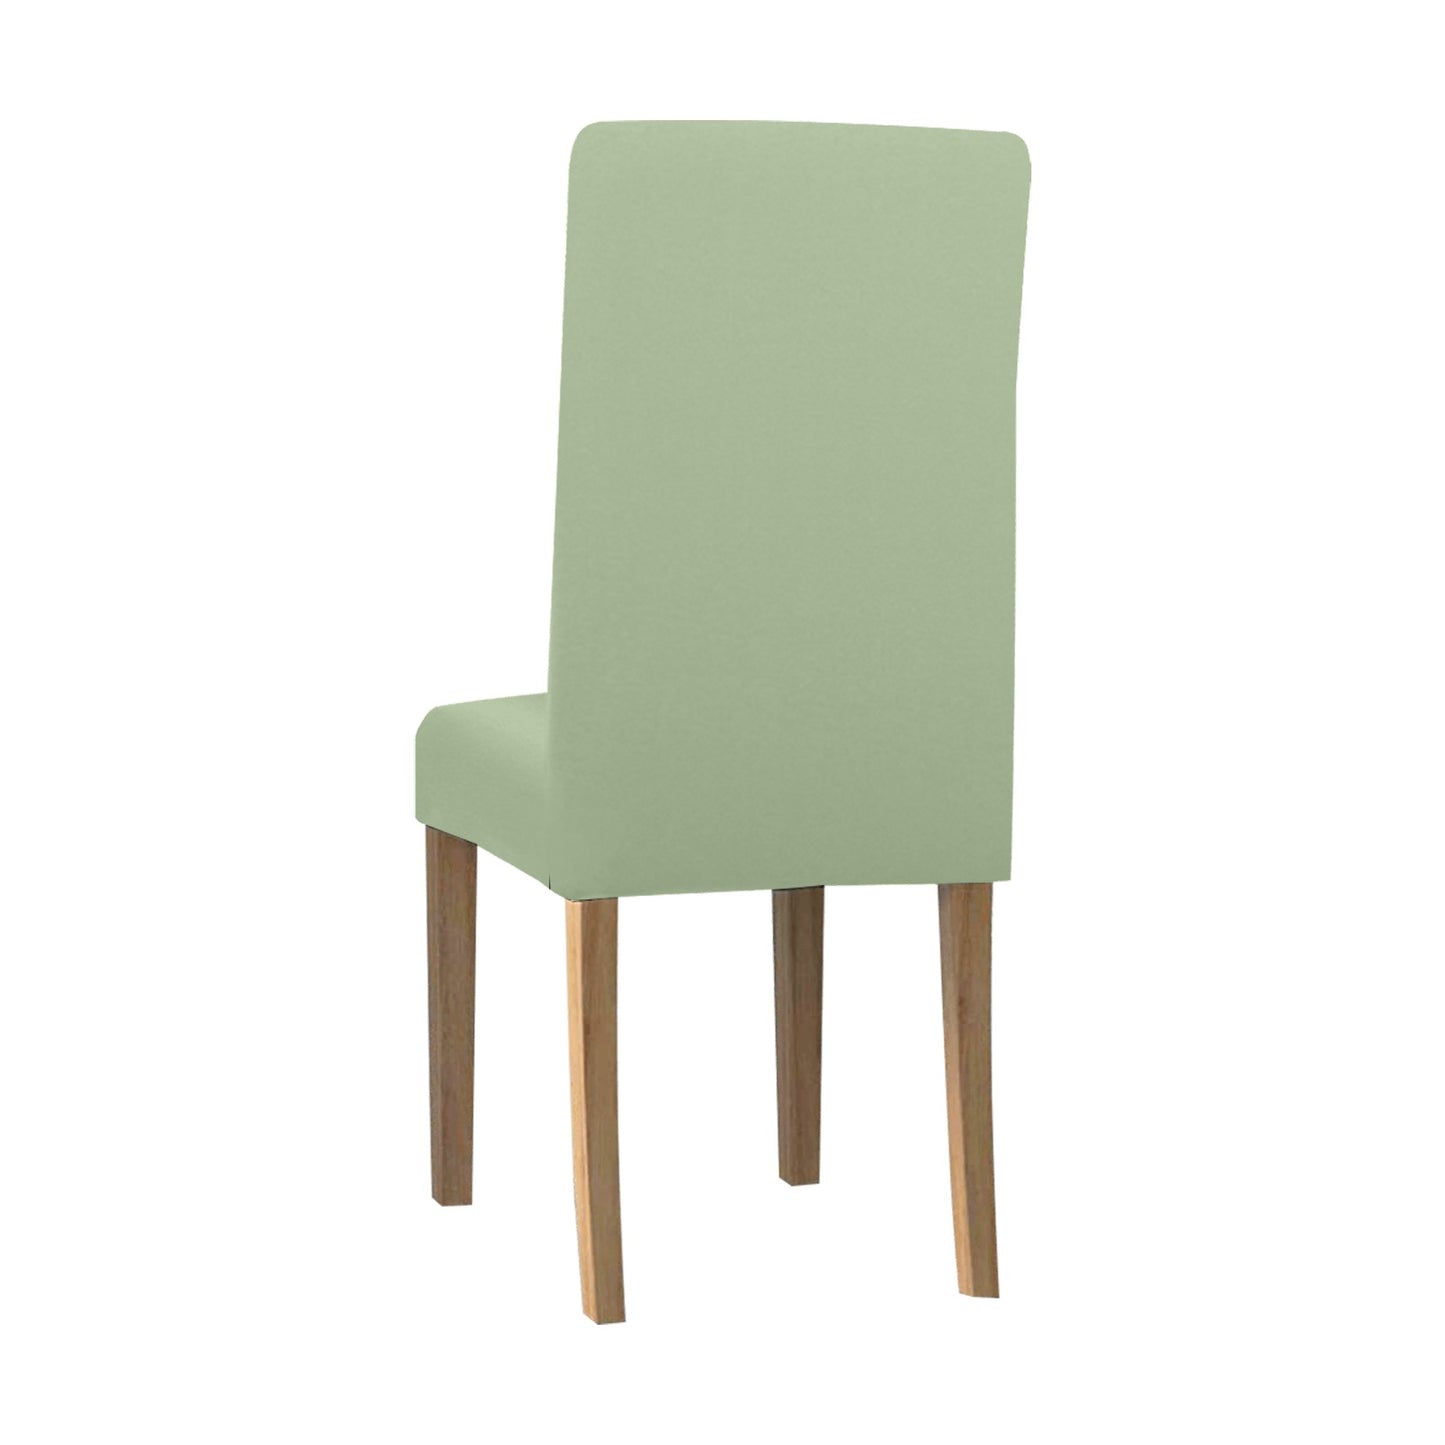 Sage Green Dining Chair Seat Covers, Light Olive Solid Color Stretch Slipcover Furniture Dining Room Party Banquet Home Decor